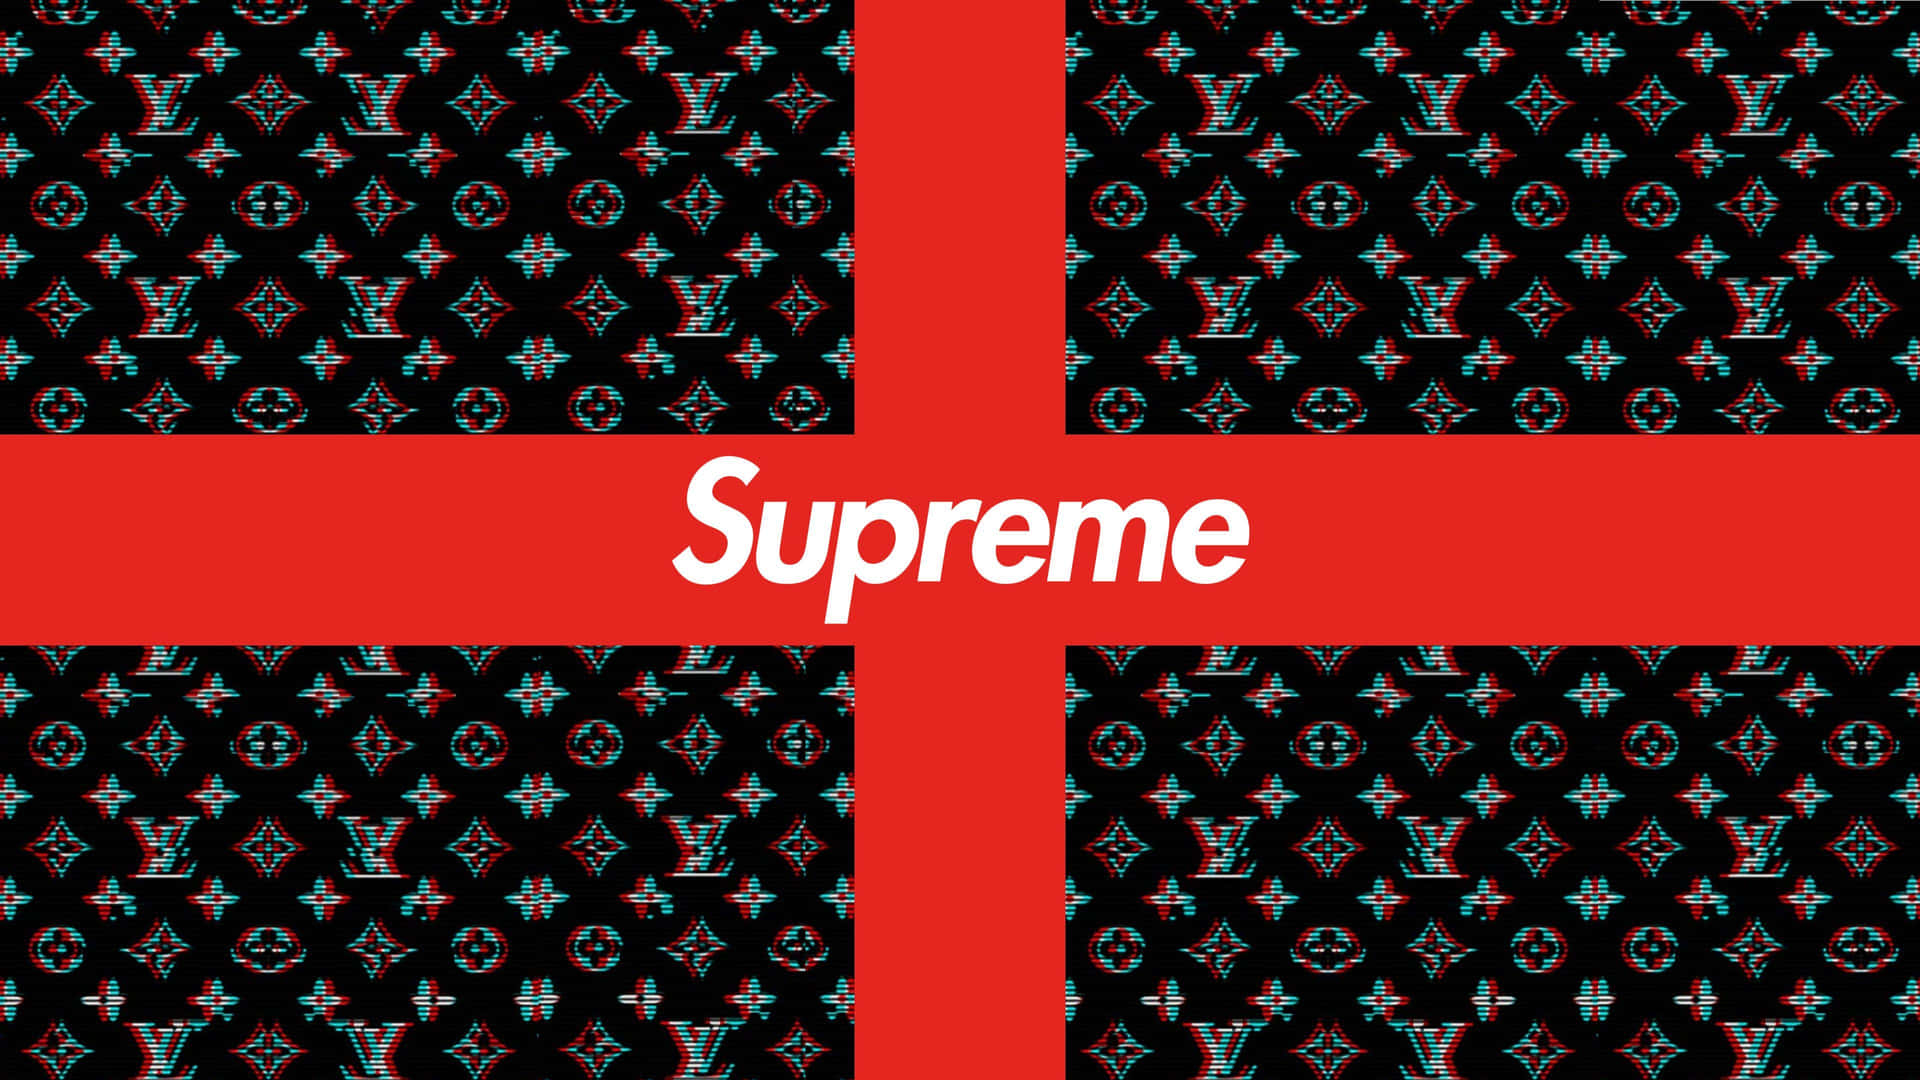 A classic Supreme Logo in the center of a vibrant red background Wallpaper